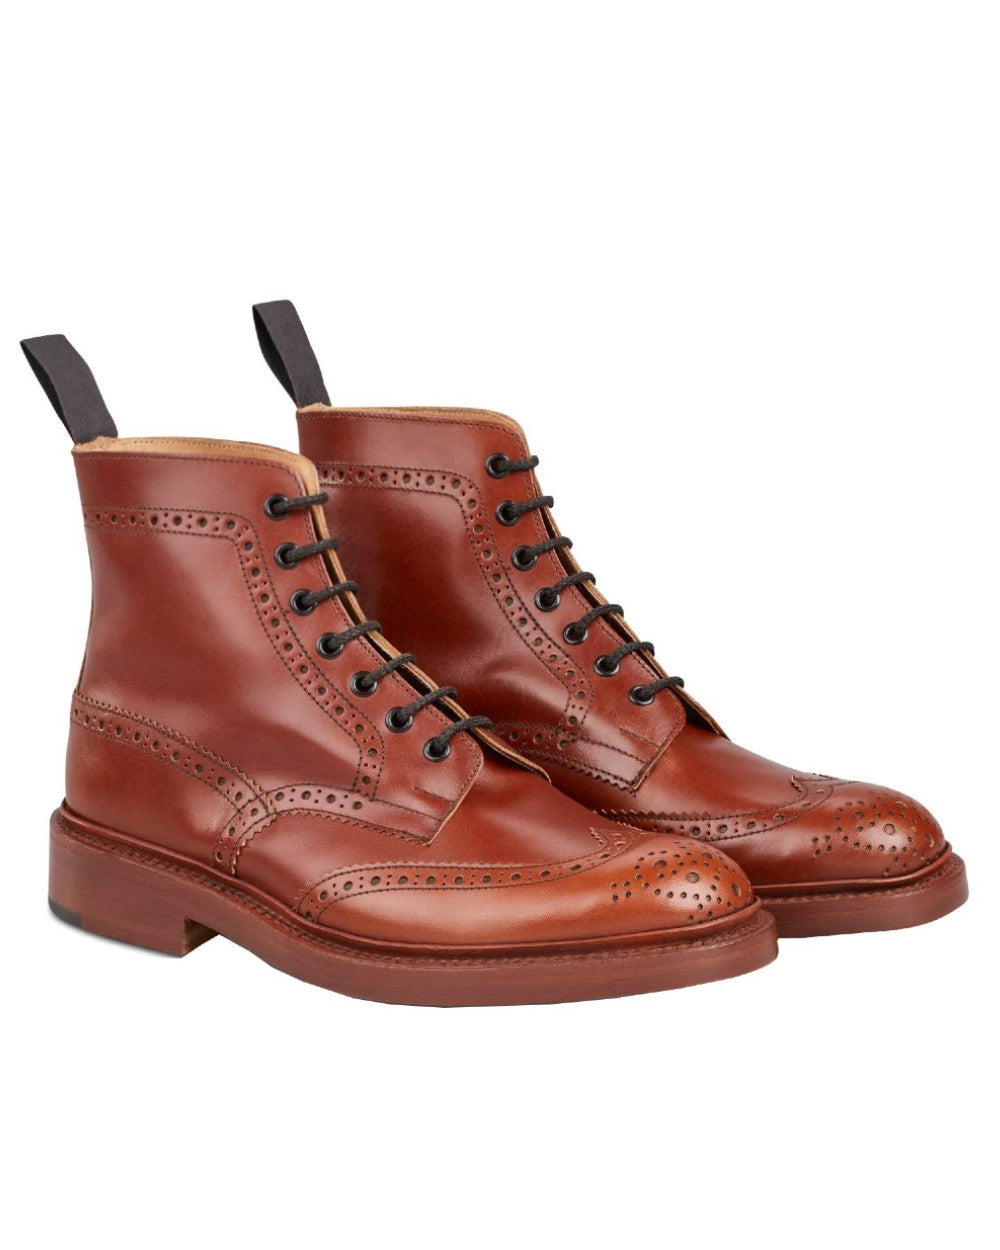 Marron Antique Coloured Trickers Stow Leather Sole Country Boot On A White Background 